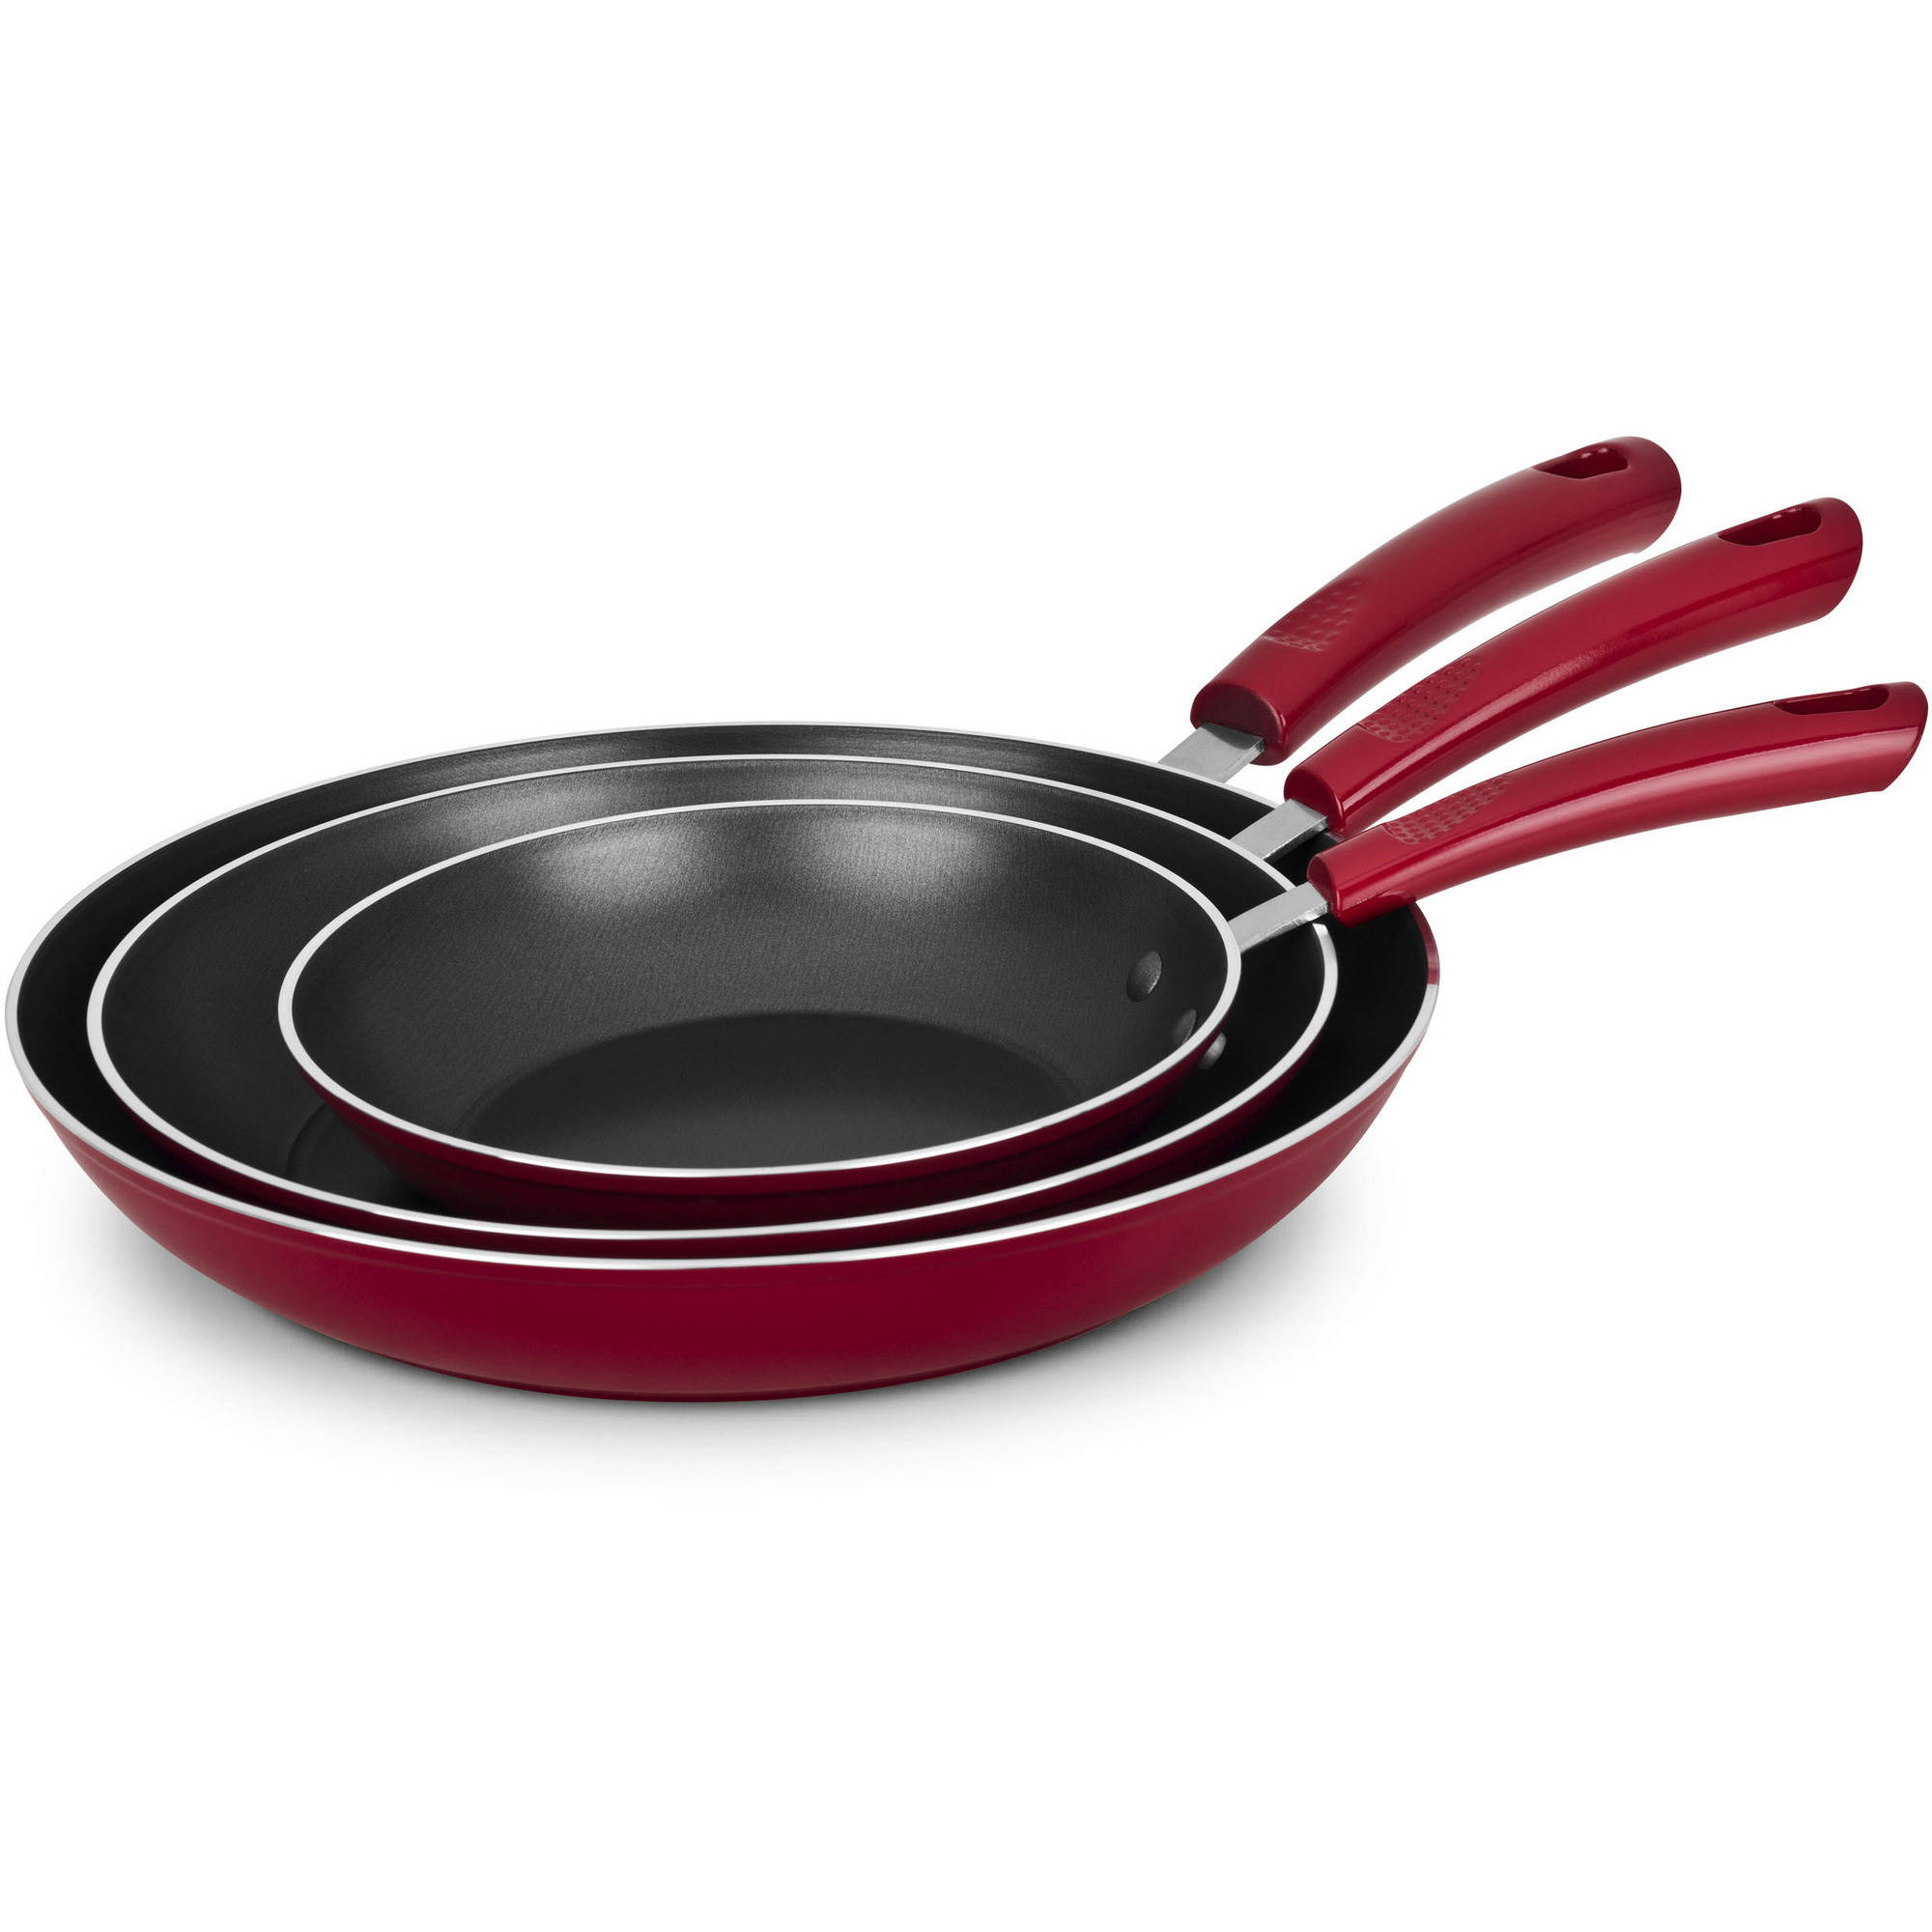 Mainstays 3-Piece Forged Skillet Set, Red - image 1 of 4